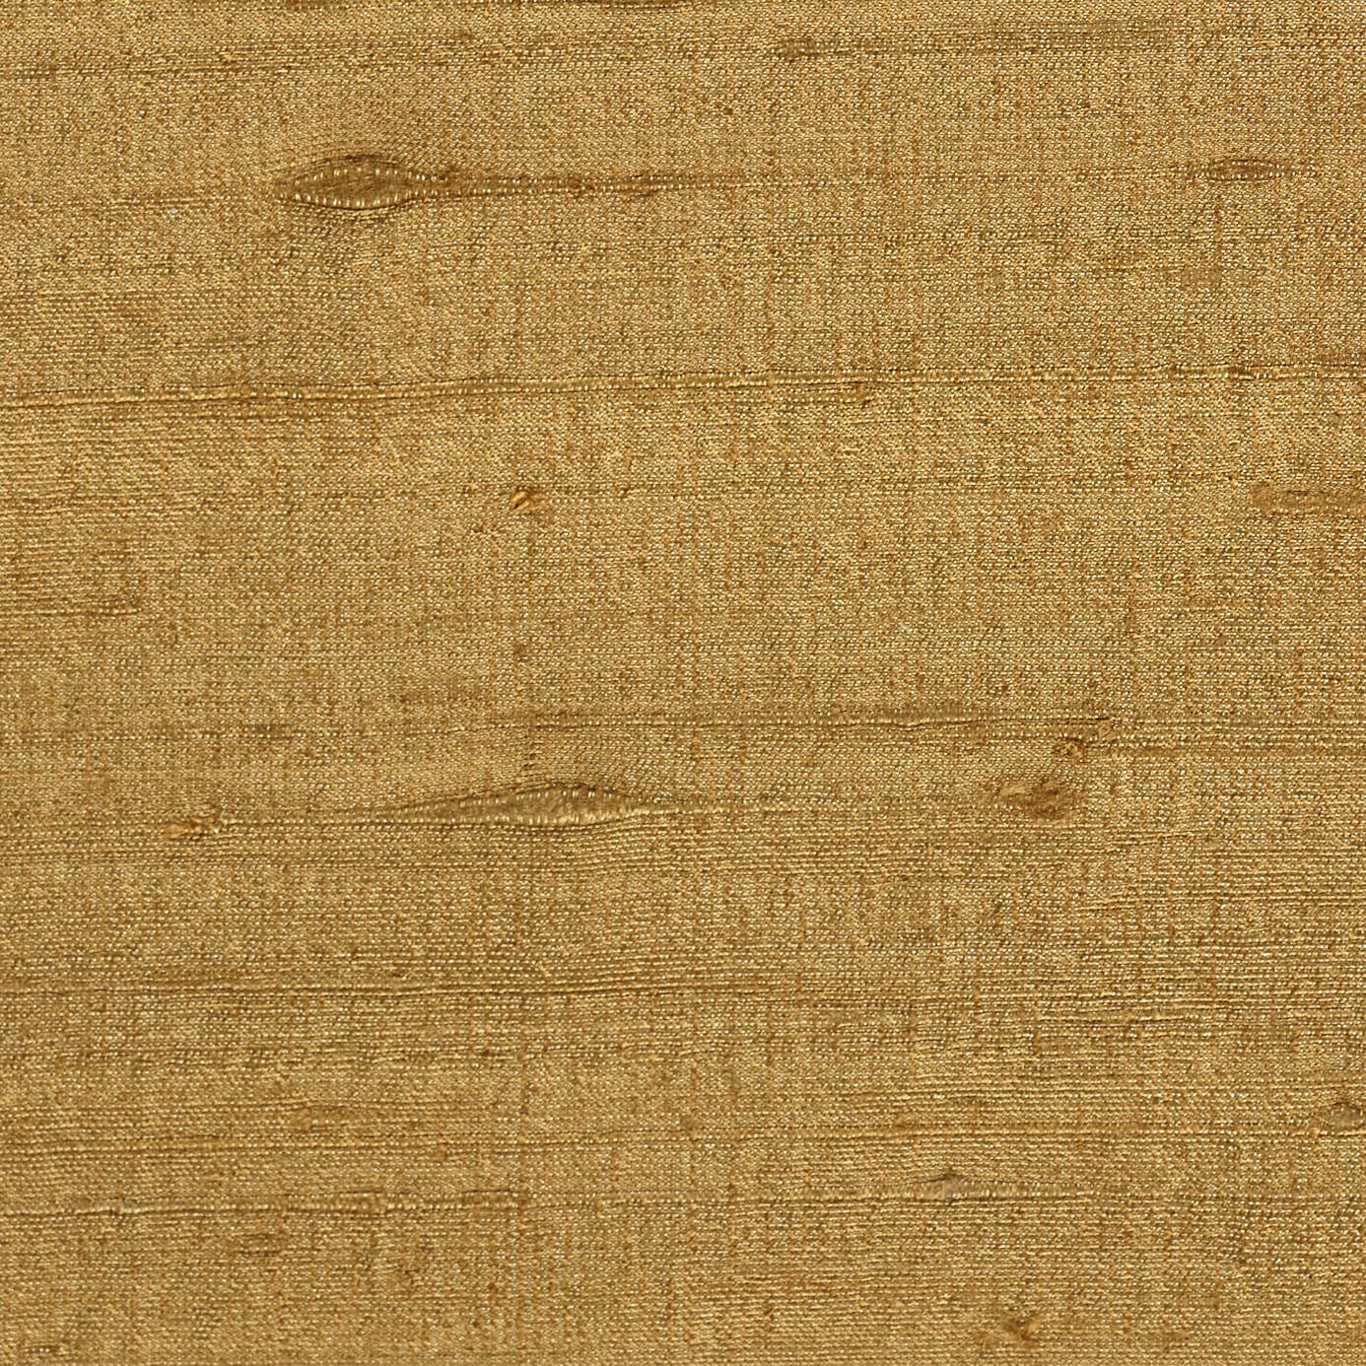 Laminar Antique Gold Fabric by HAR